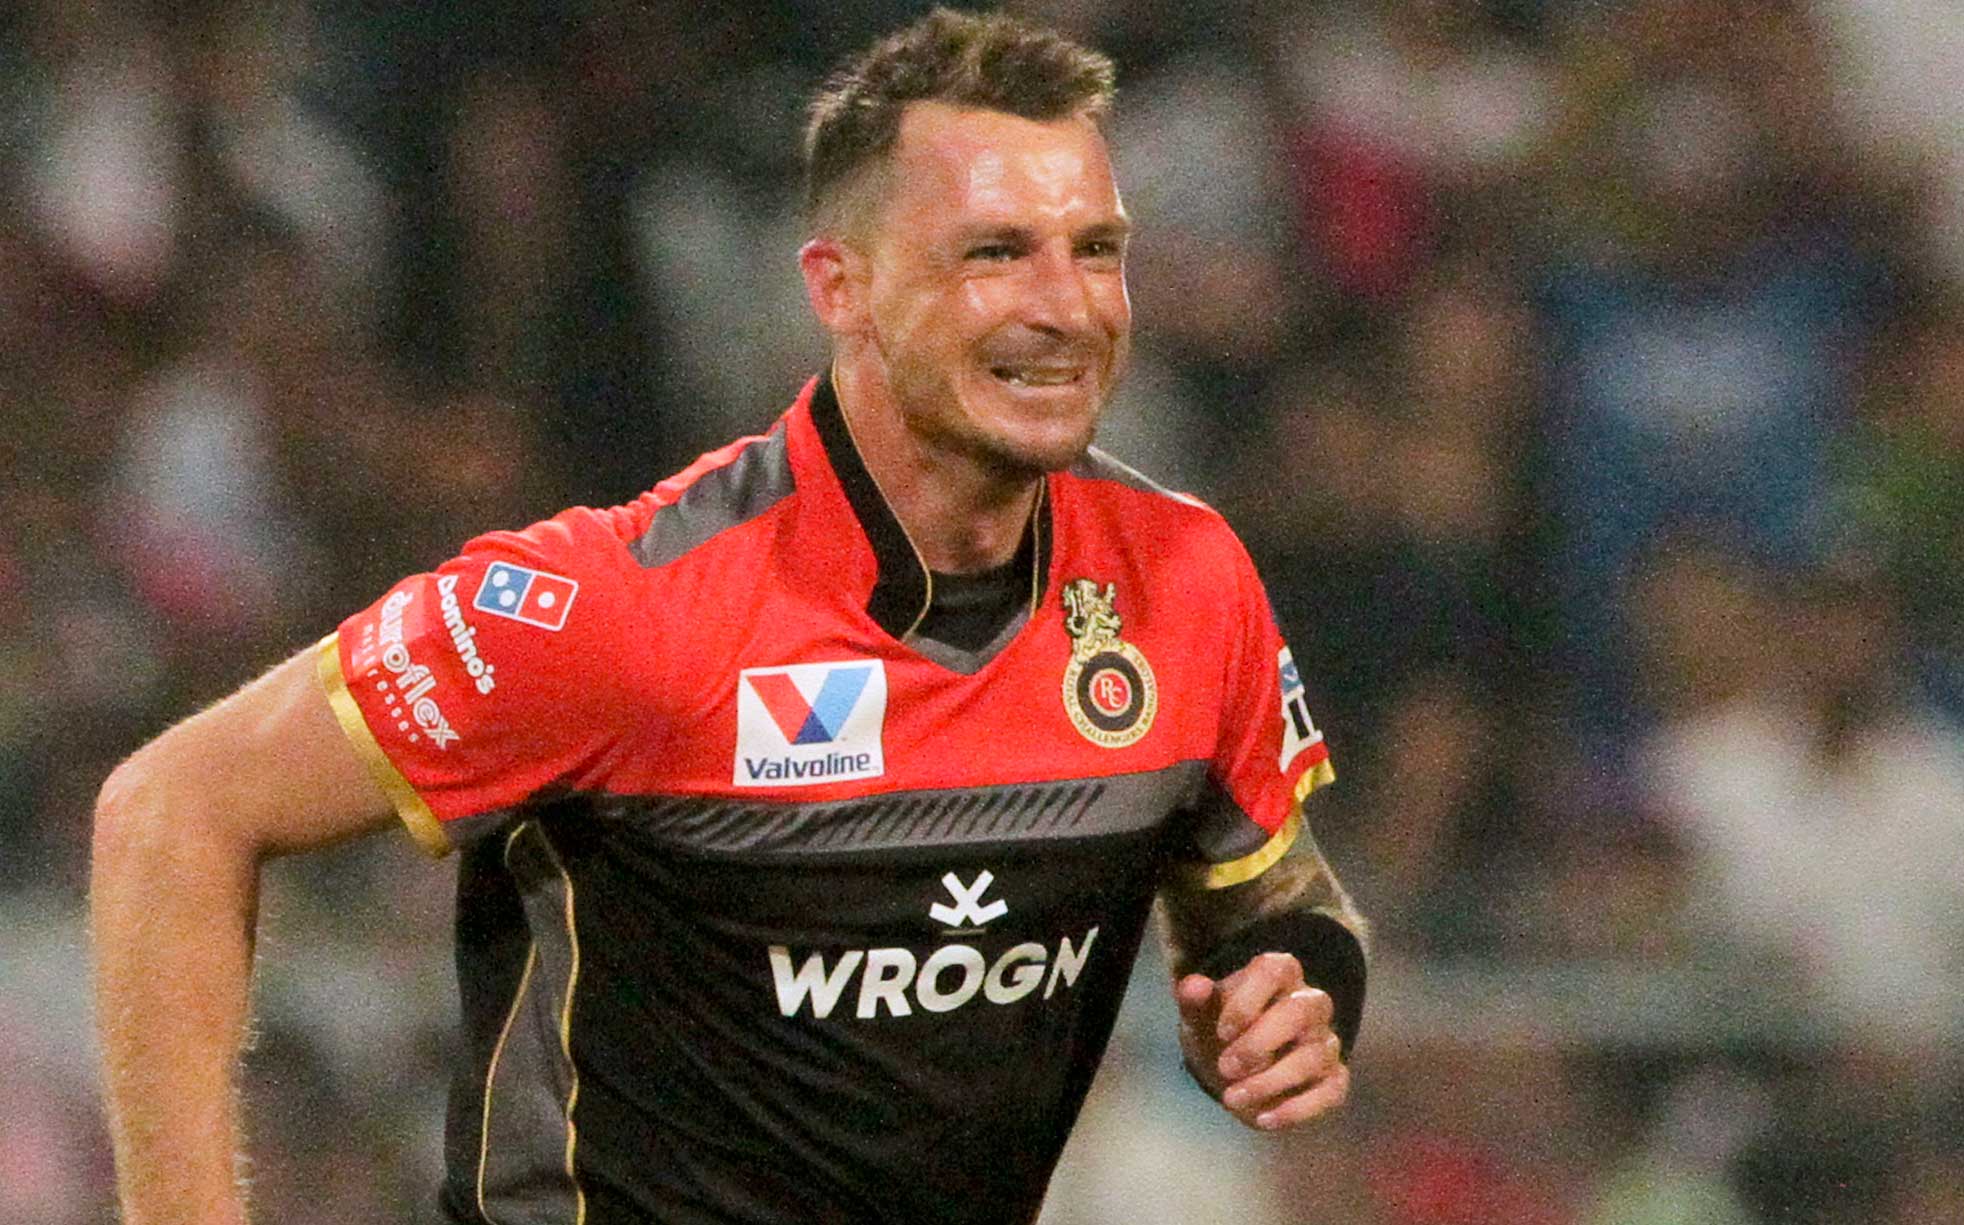 south-africa - Dale Steyn wakes up late from IPL slumber - Telegraph India